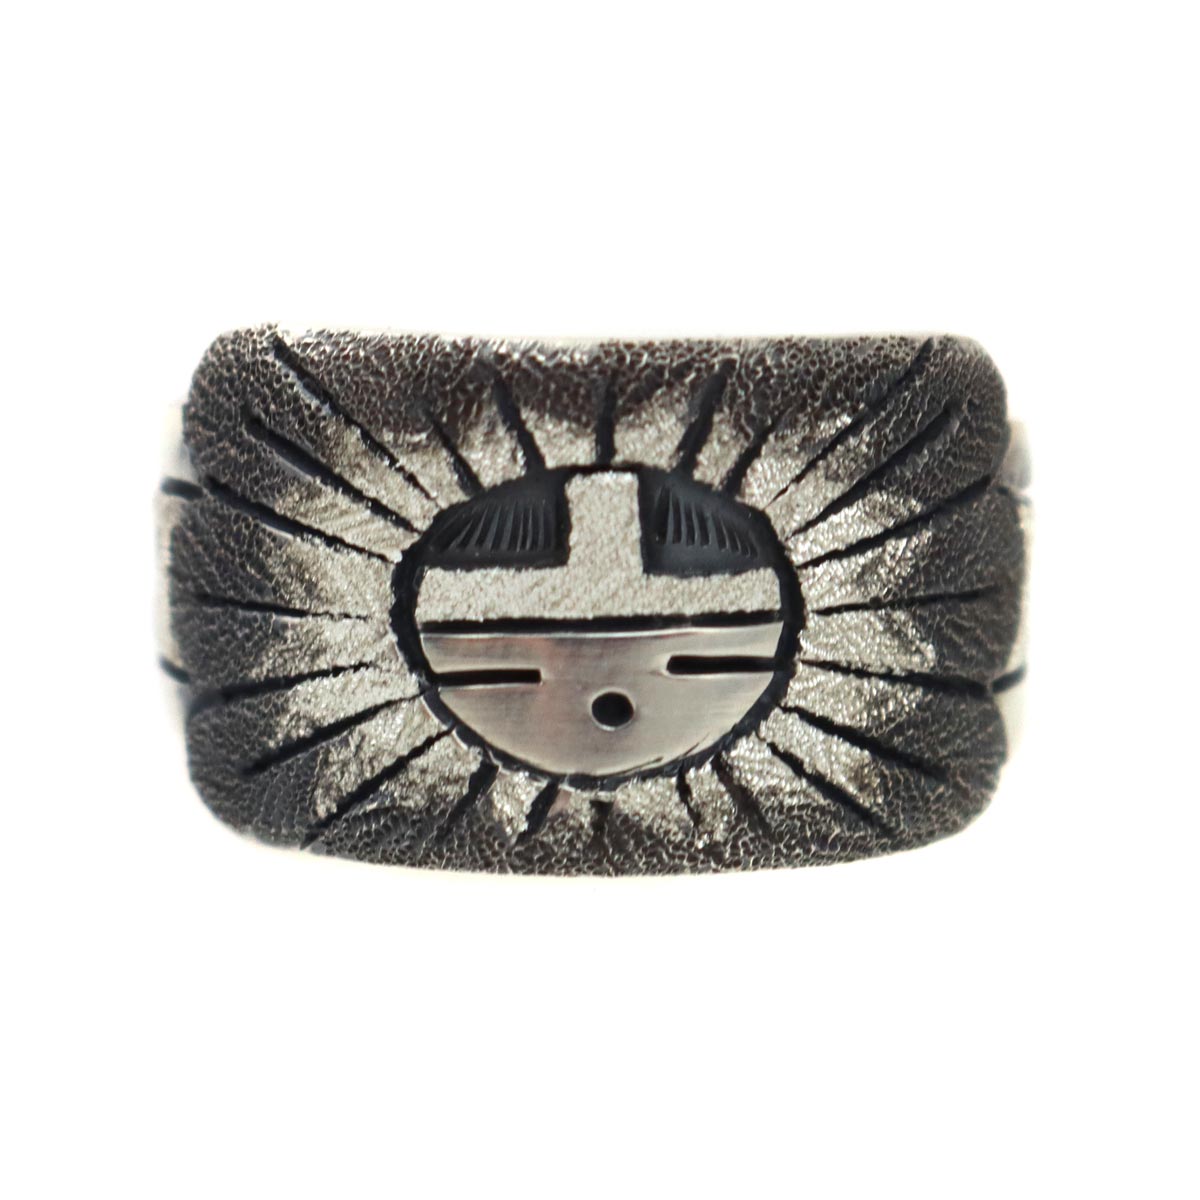 Ronald Wadsworth - Hopi Contemporary Sterling Silver Overlay Ring with Sunface Kachina Design, size 8 (J14777)
